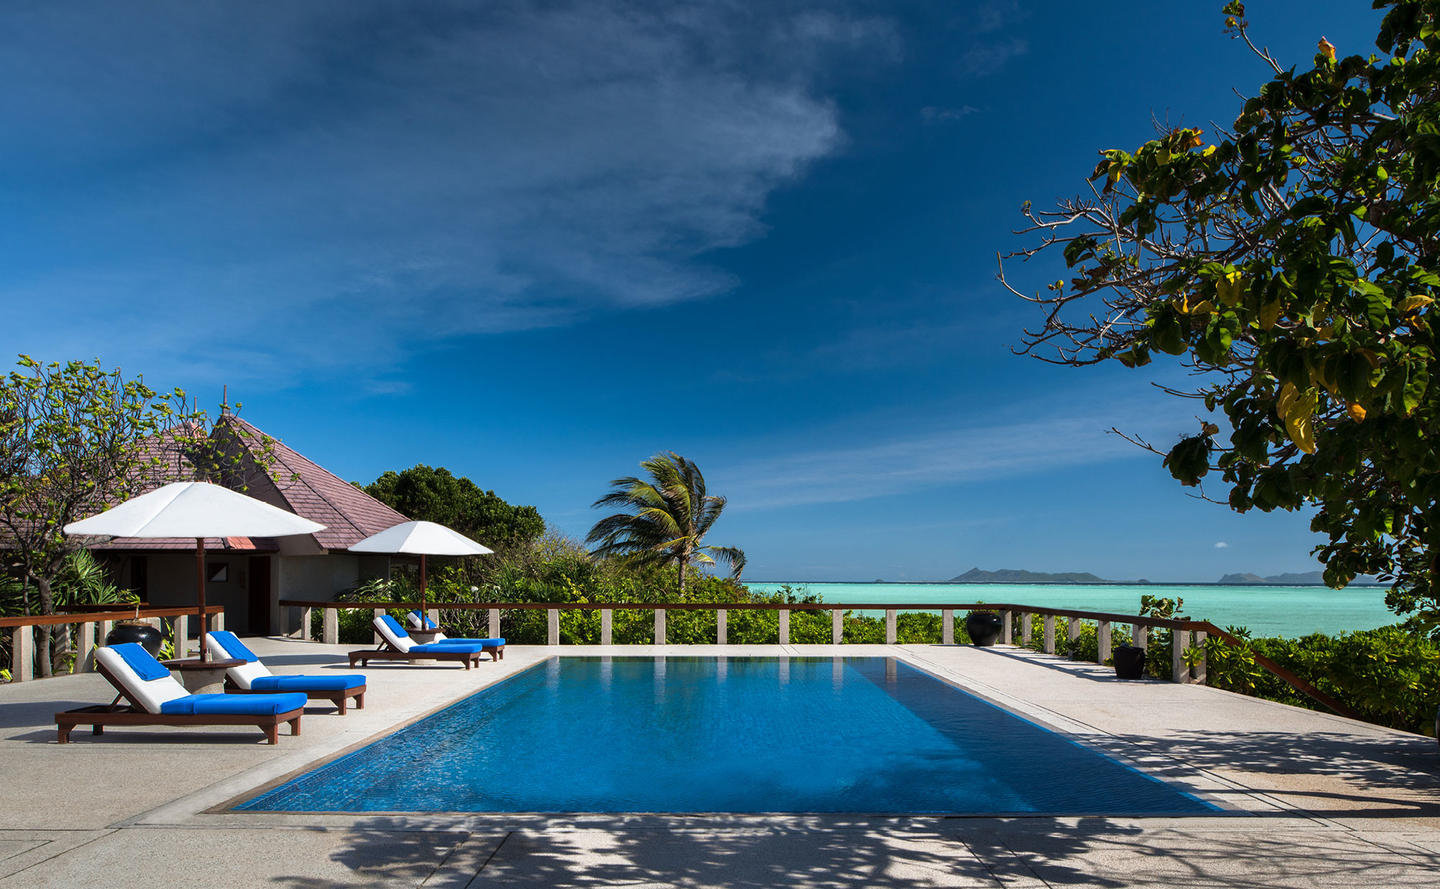 Swimming Pool, Four-Bedroom Villa - Amanpulo, Philippines